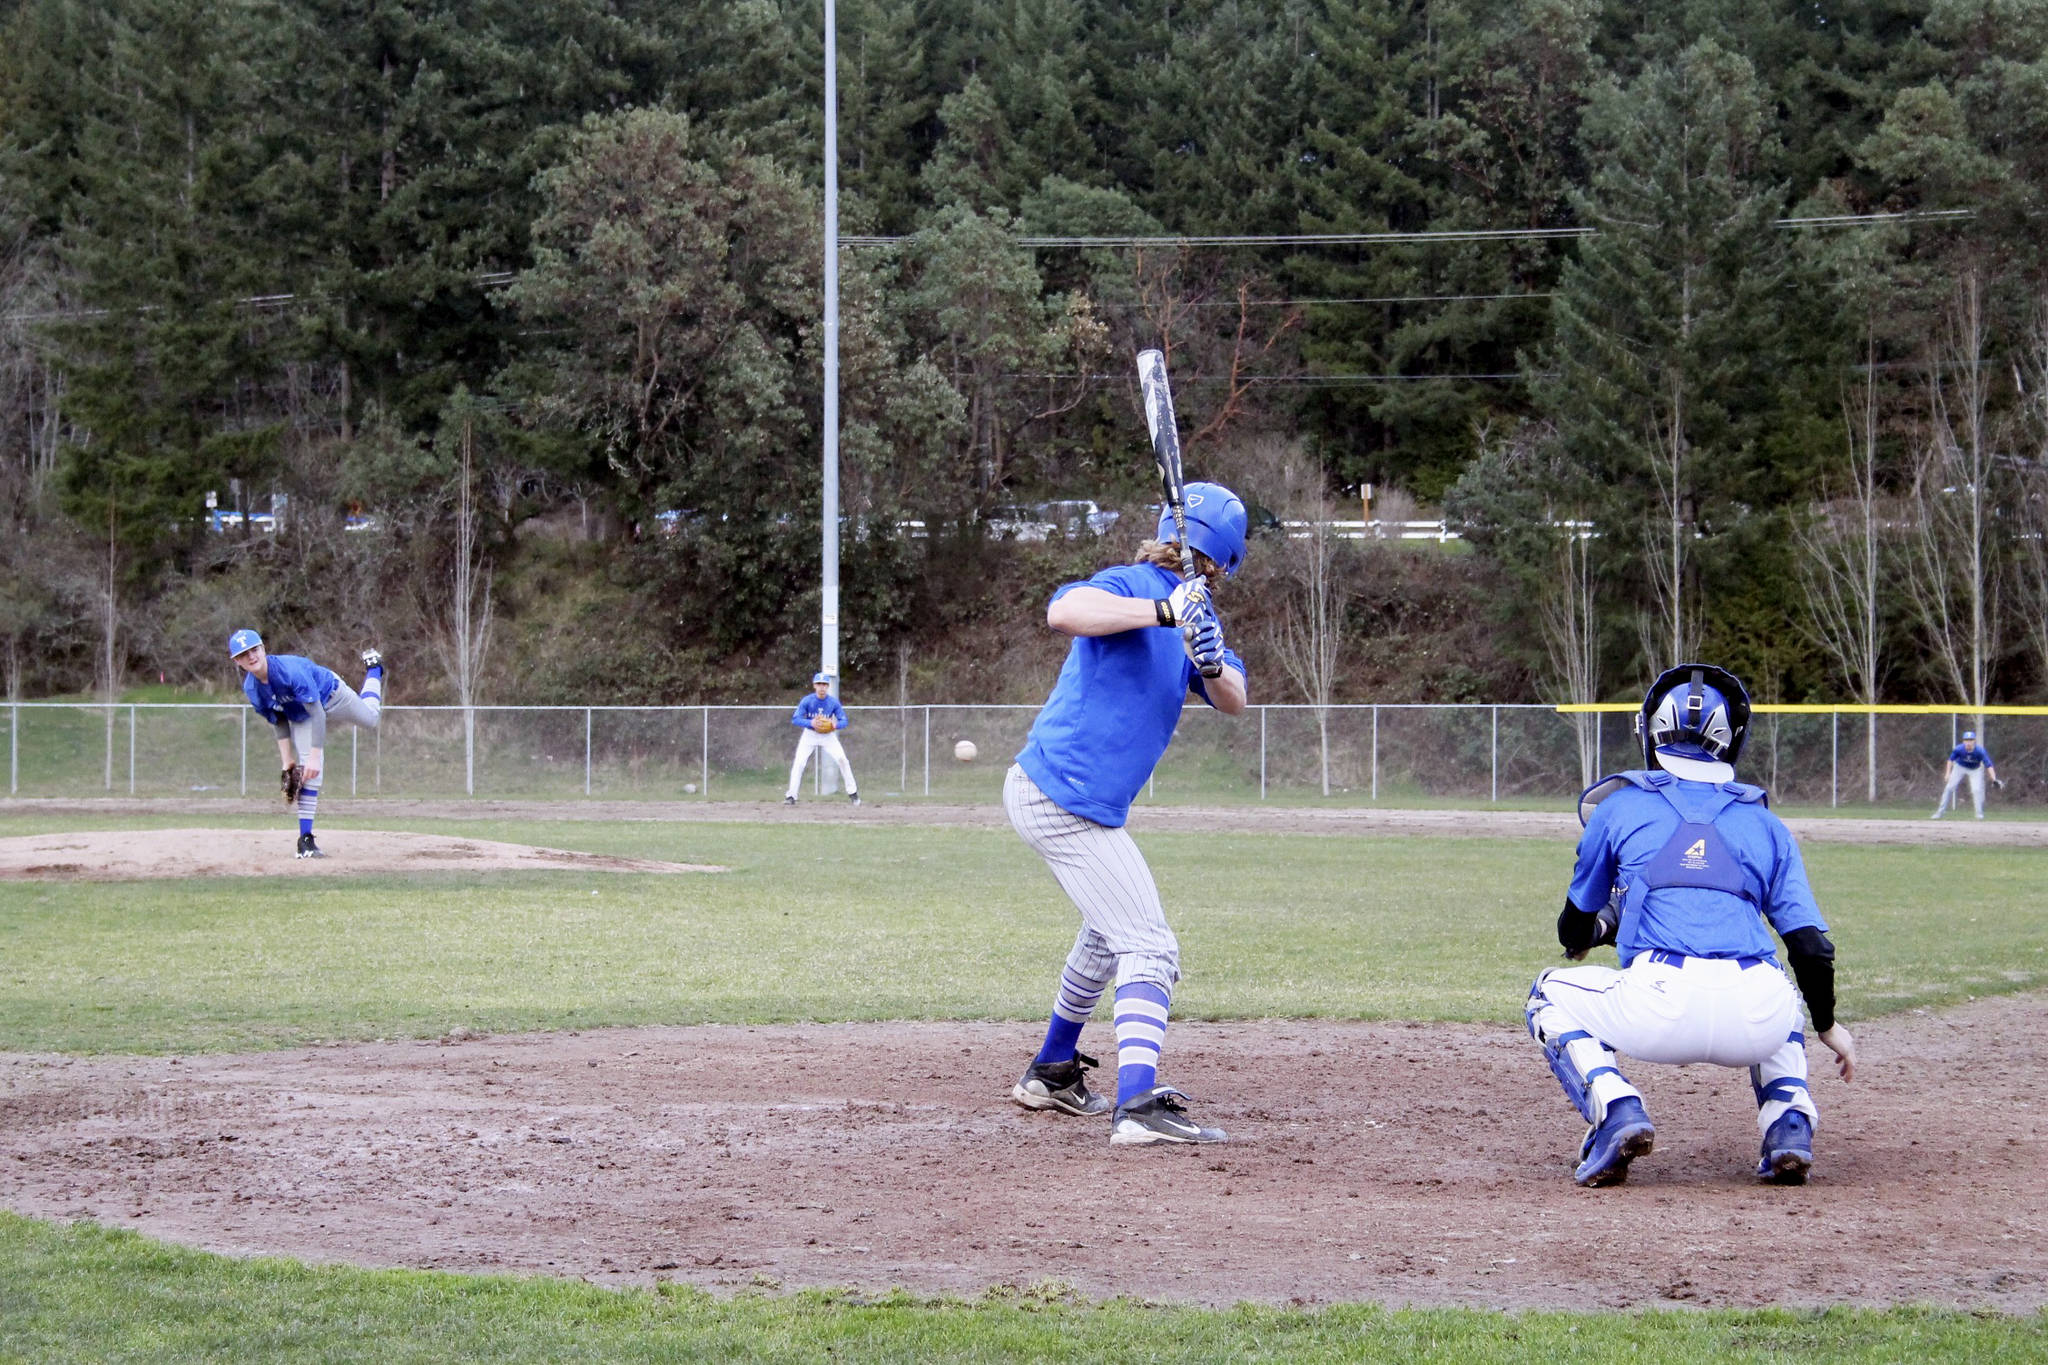 Senior right-hander Evan Turnquist eyes a pitch before fouling it off during a March 9 practice at Olympic High School. Jacob Moore | Kitsap News Group